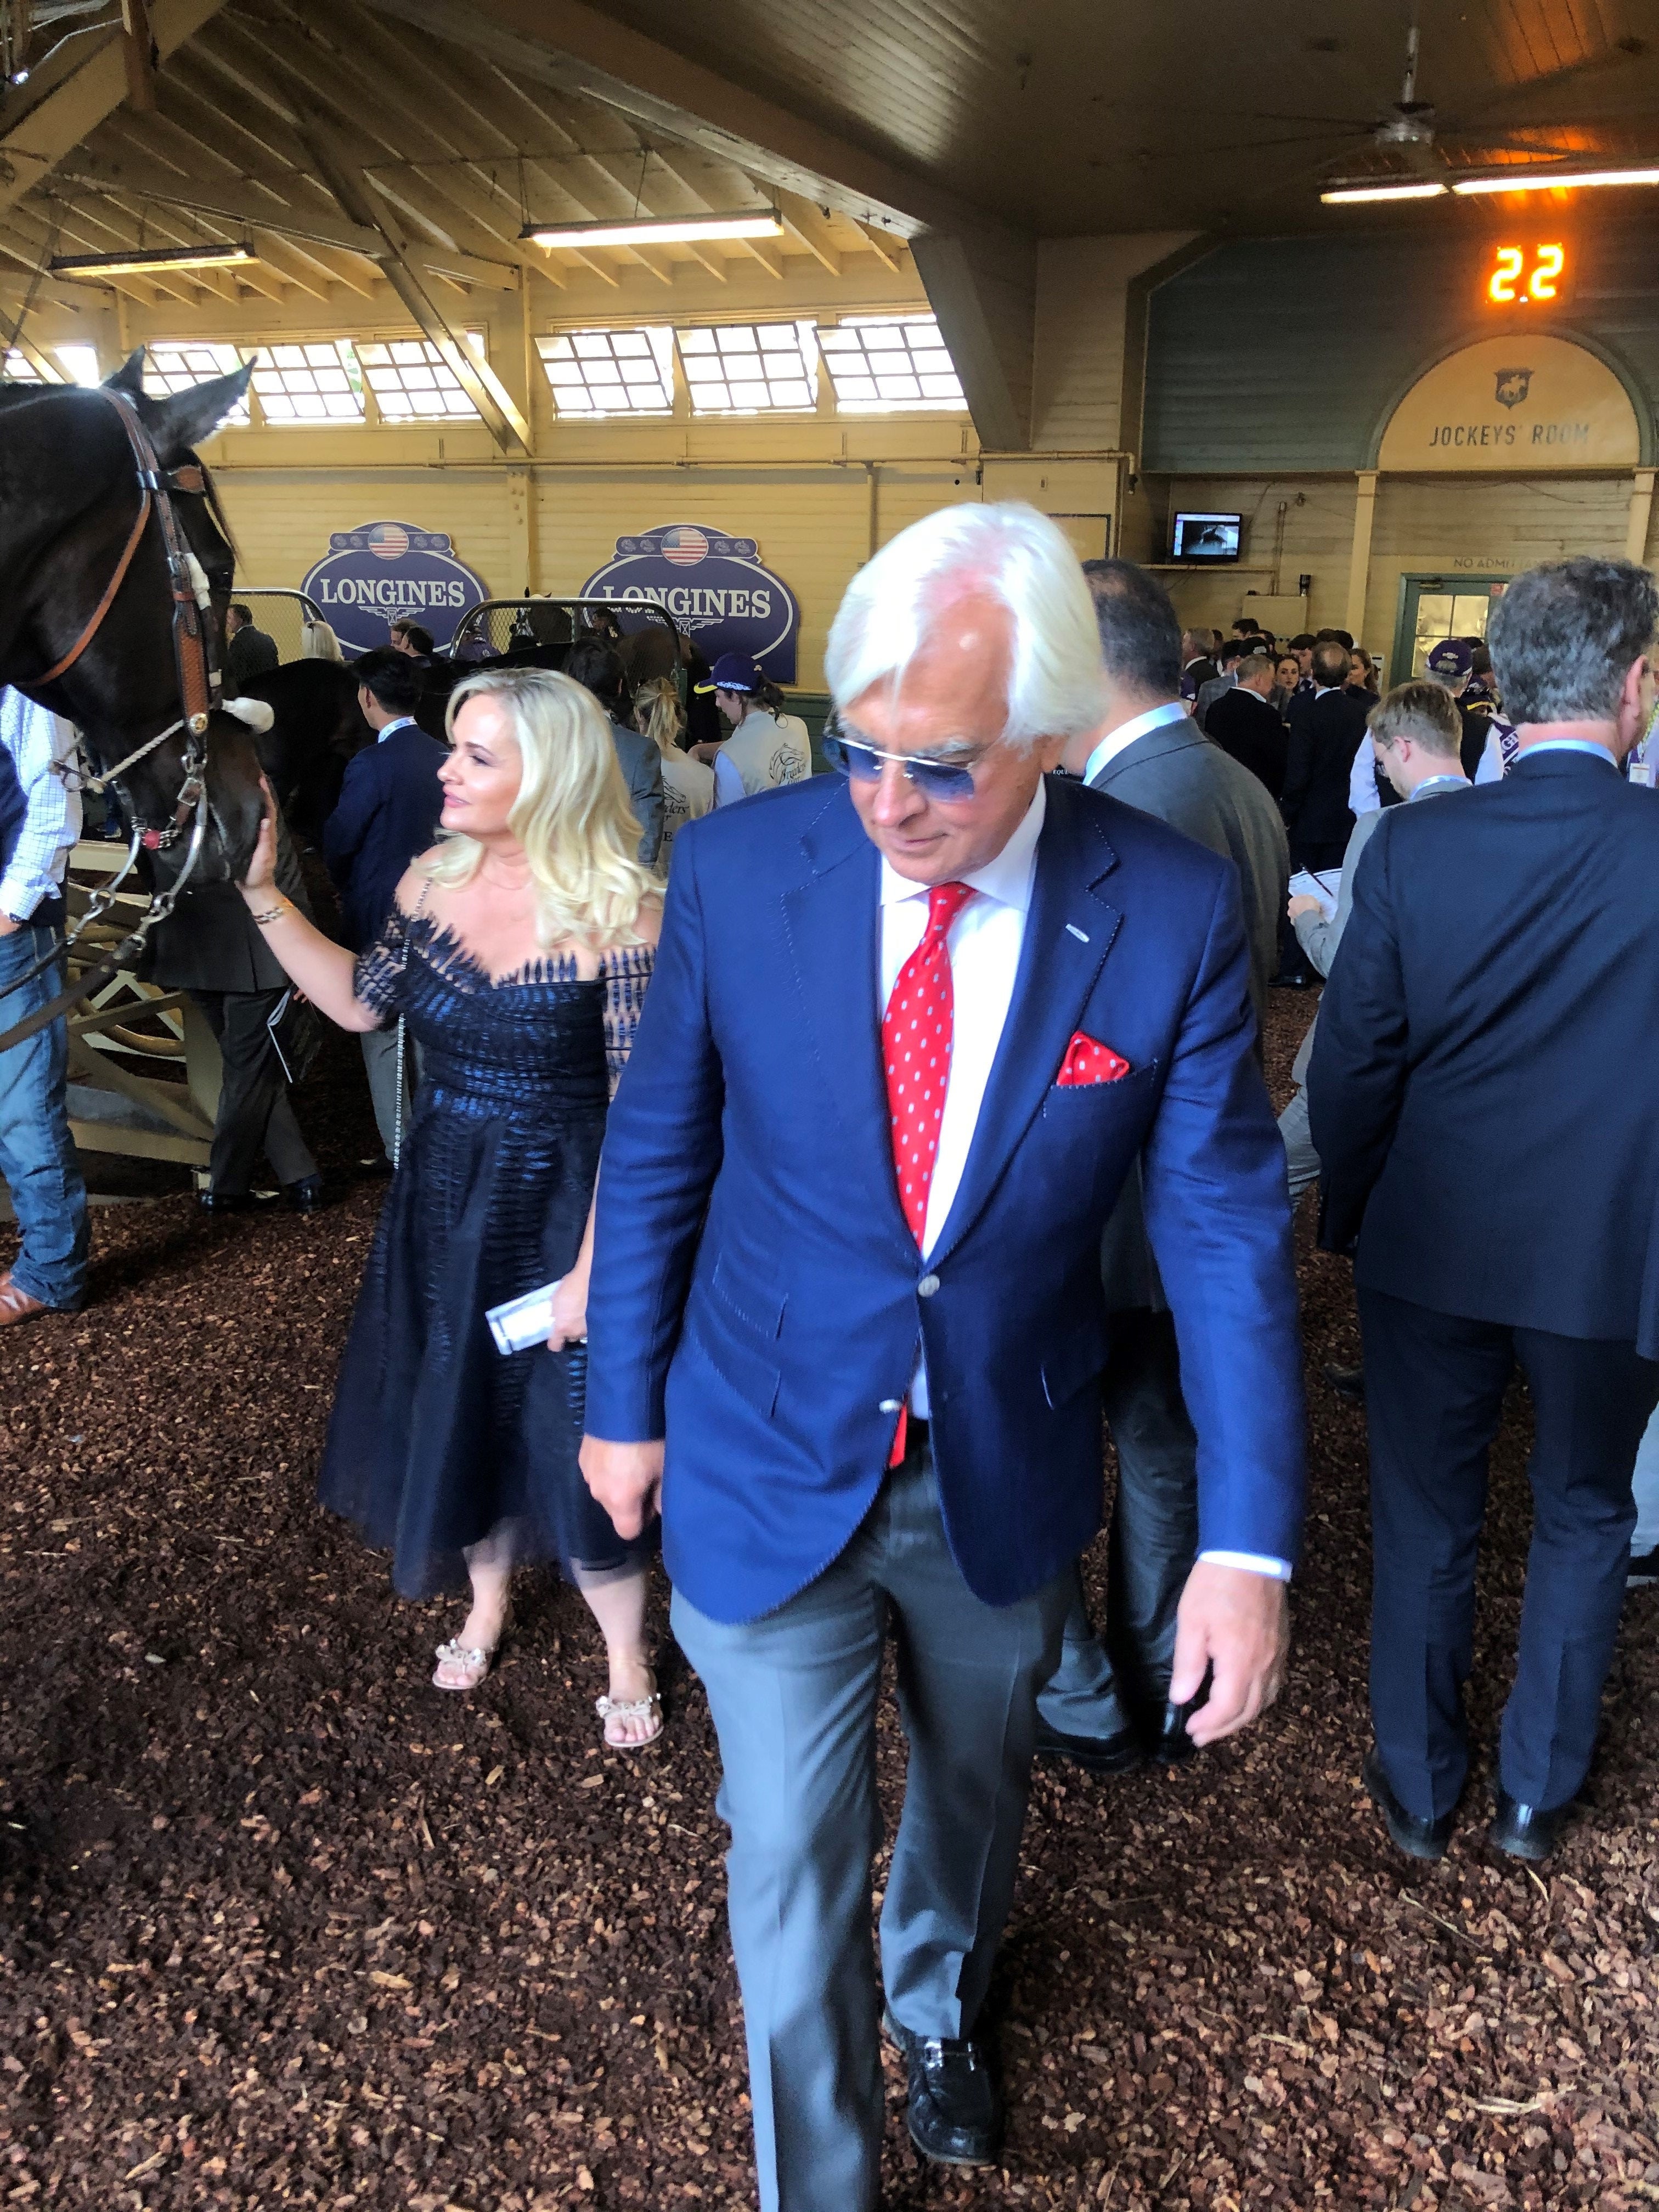 Bob Baffert has been suspended for two years by Churchill Downs